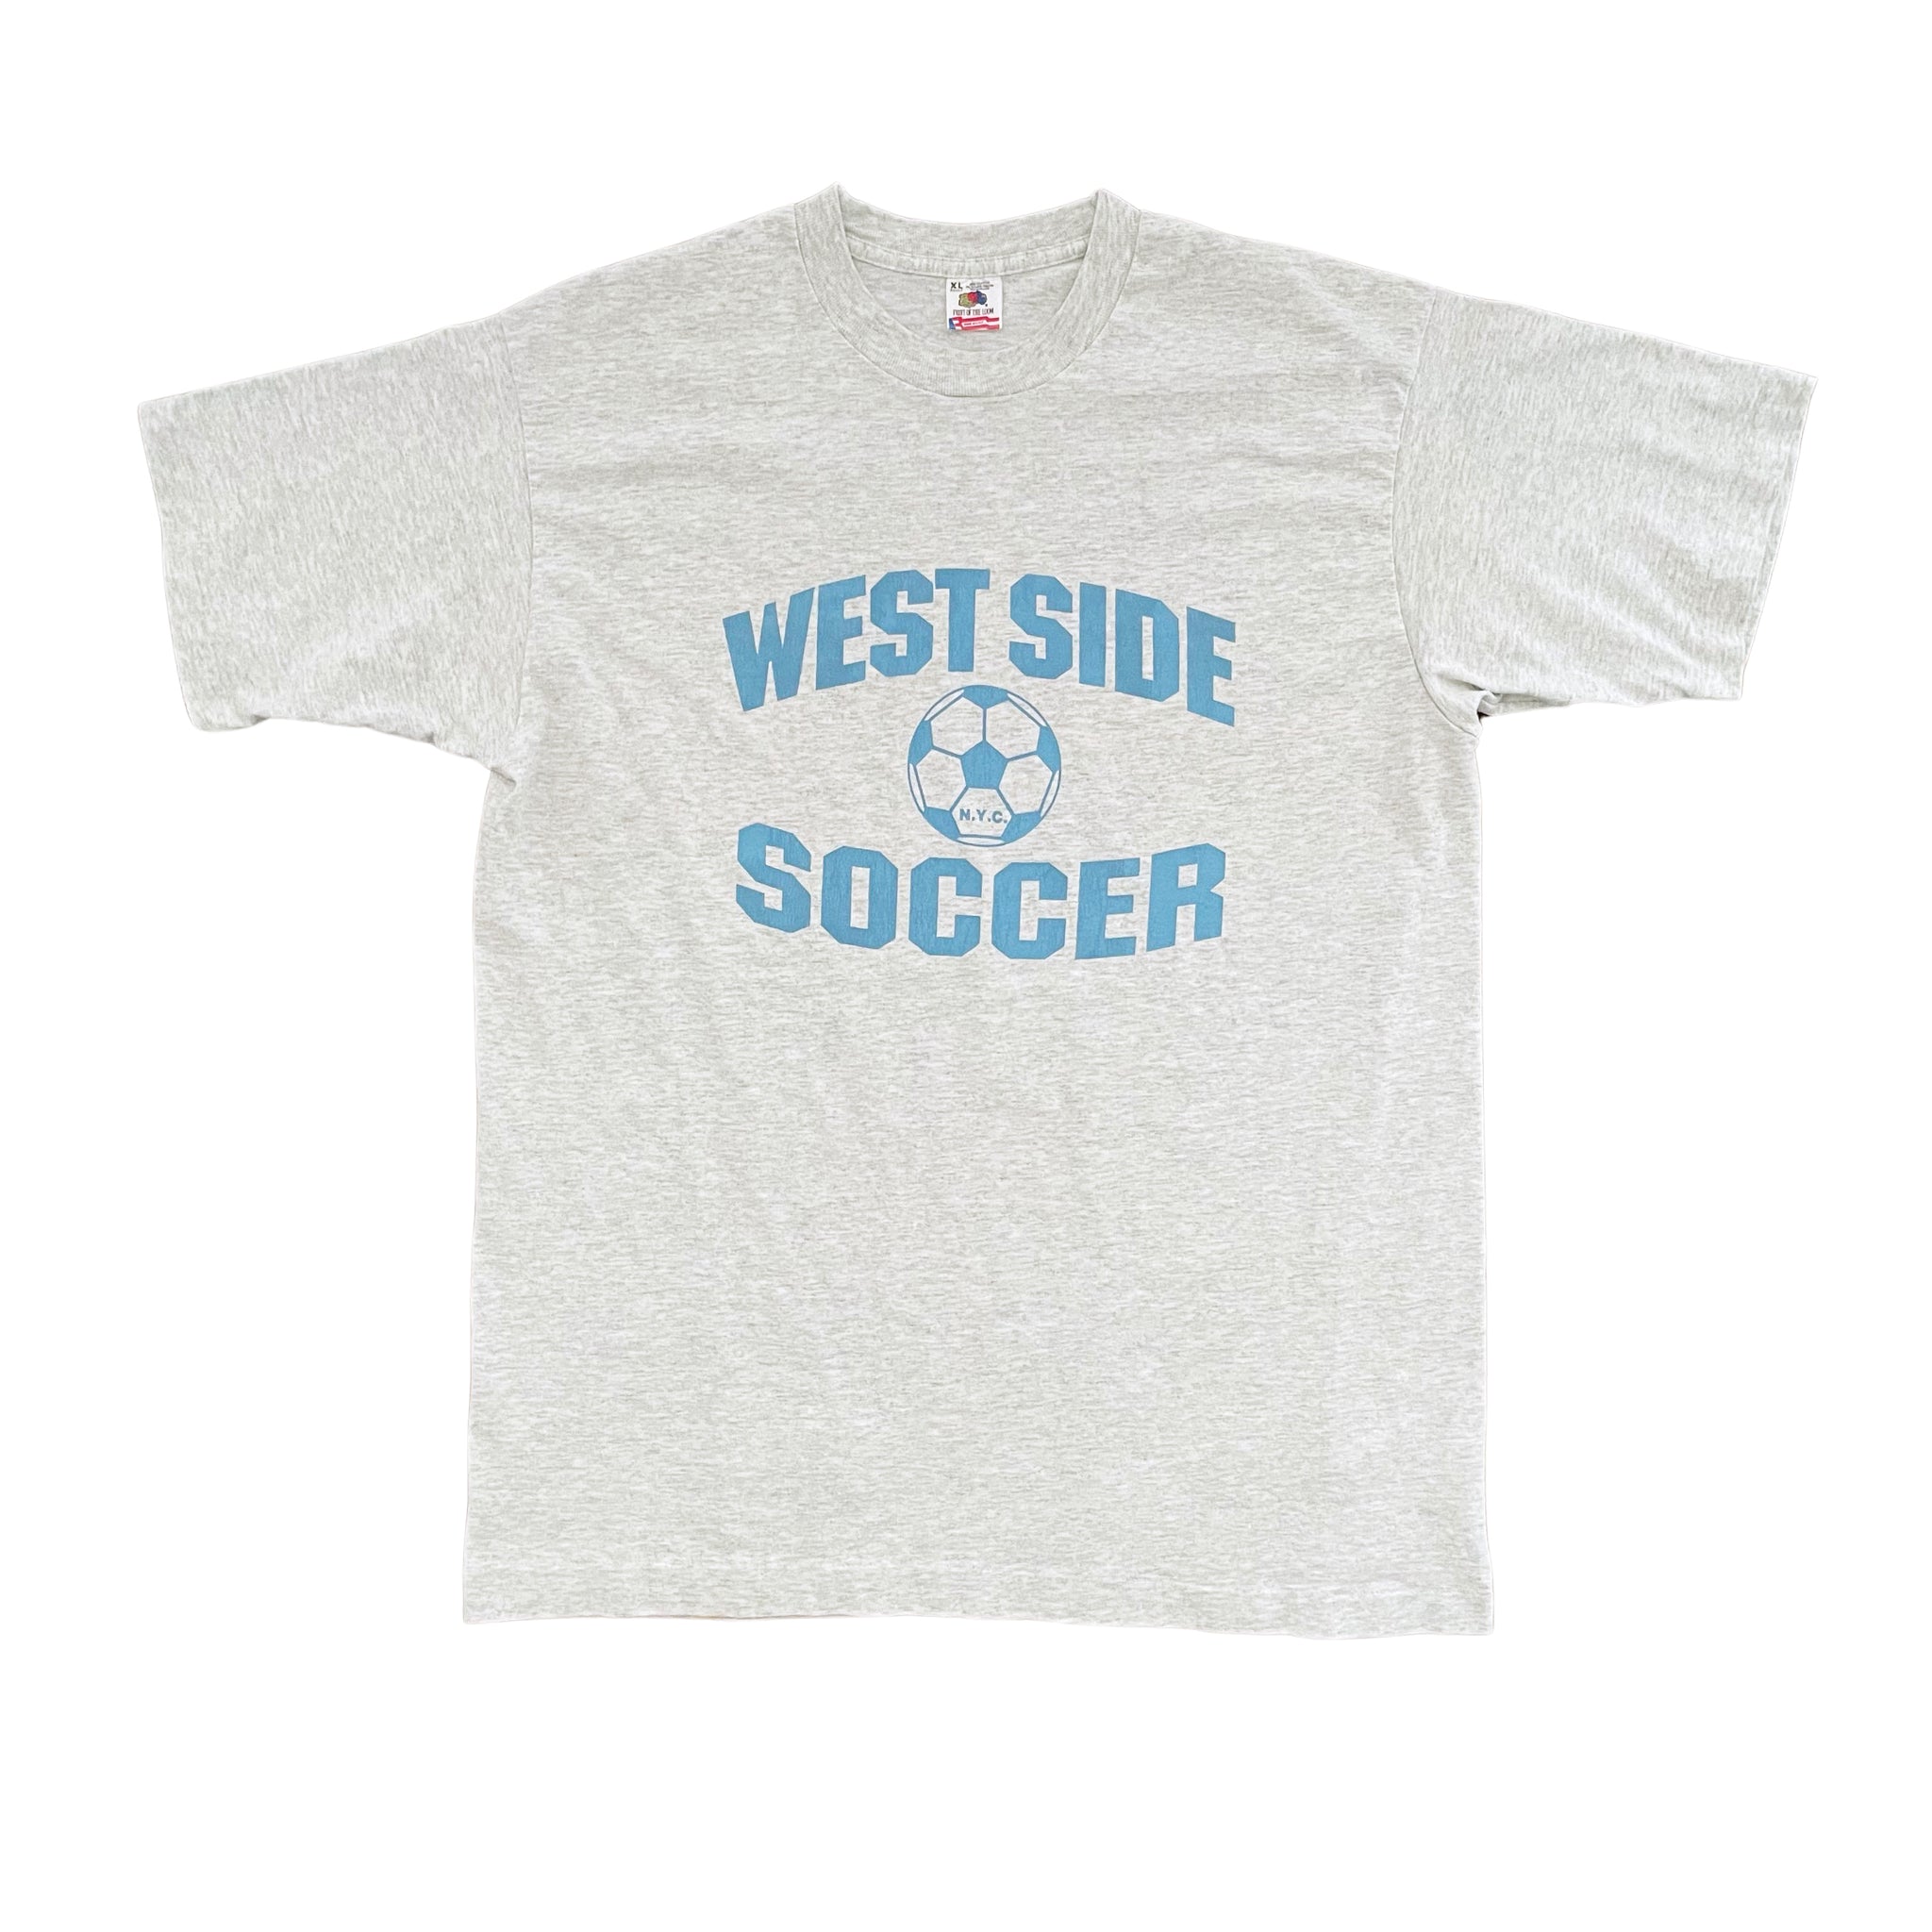 NYC West Side Soccer T-Shirt - XL